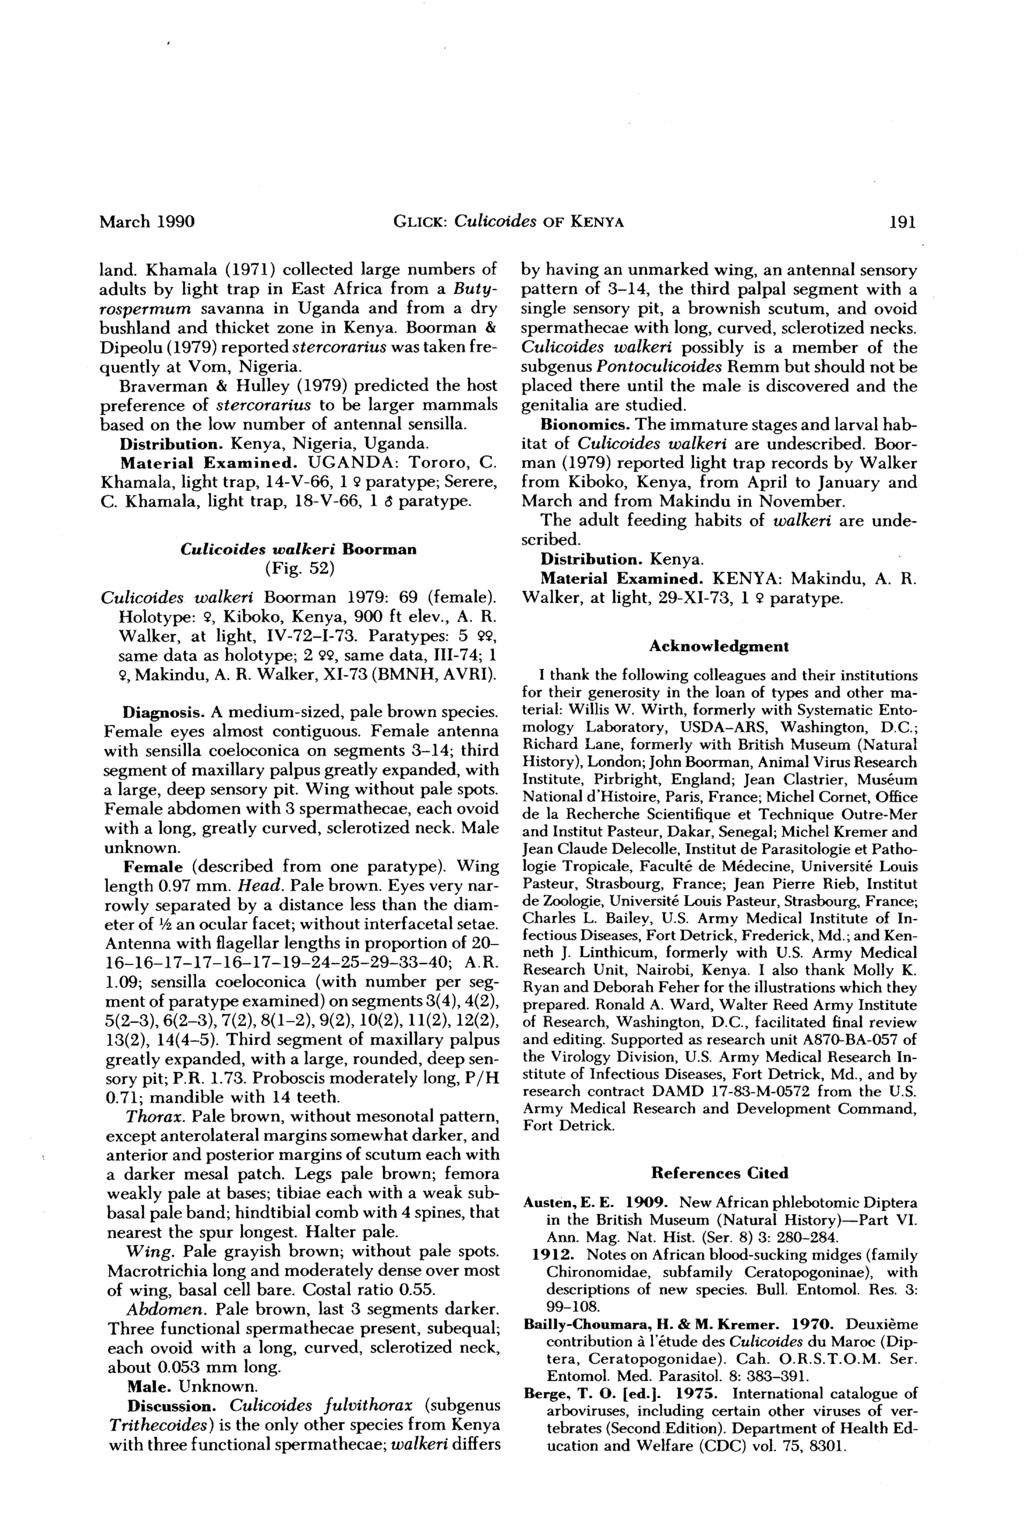 March 1990 GLICK: Culicoides OF KENYA 191 land.